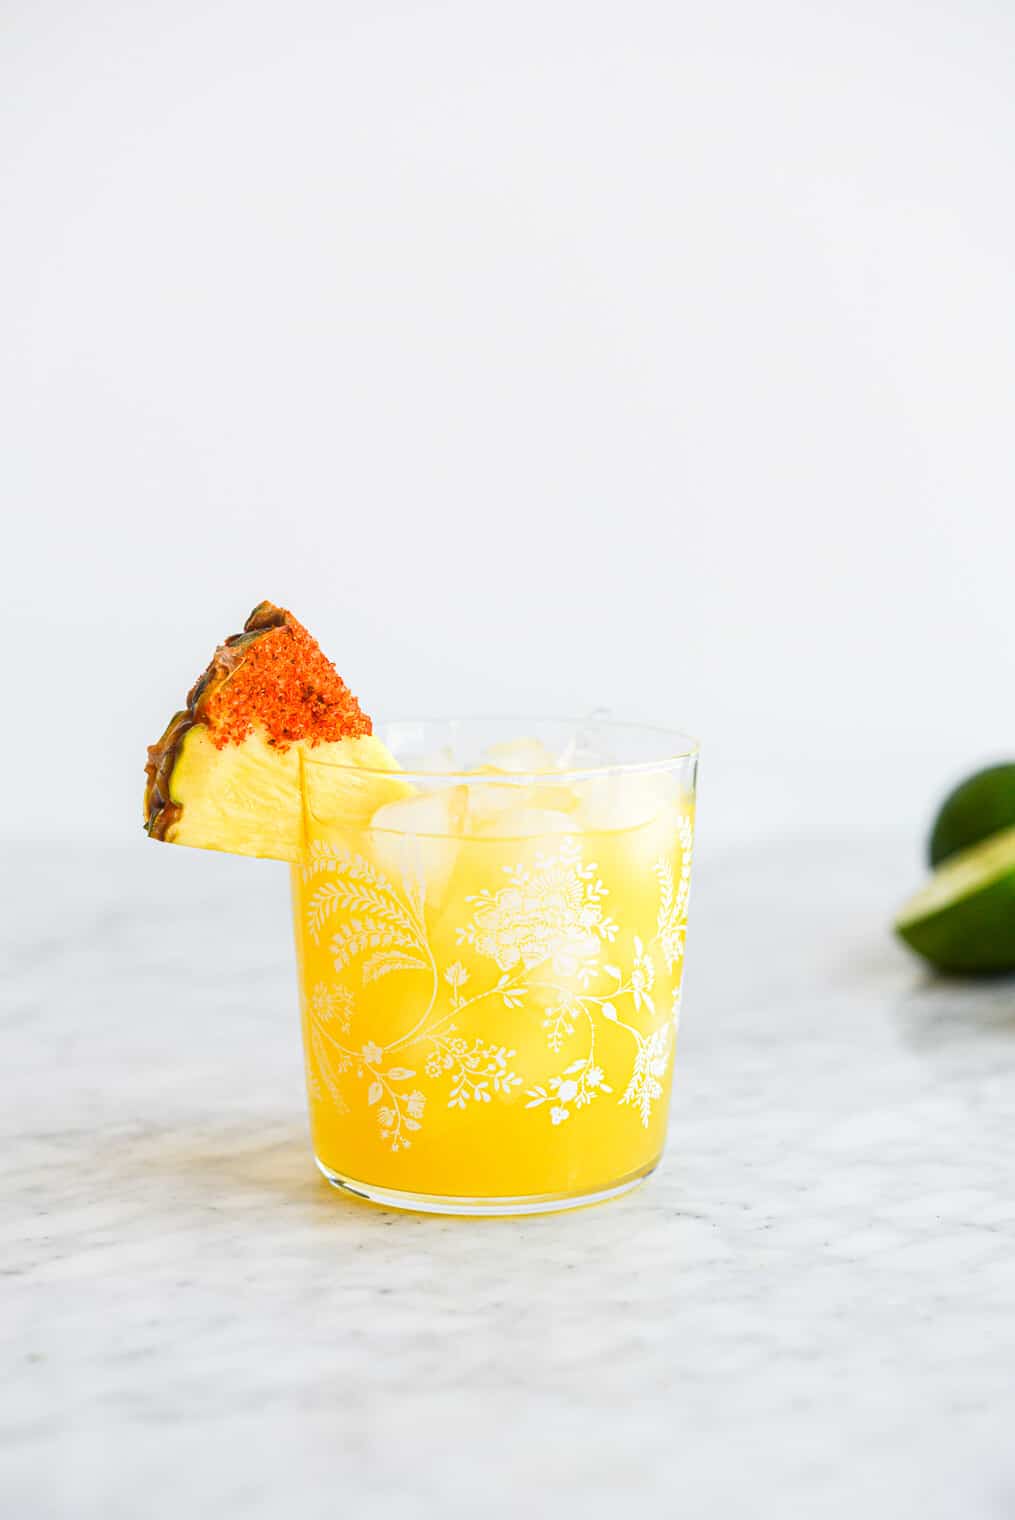 a margarita glass with a pineapple margarita on the rocks in it garnished with a pineapple wedge dipped in chili salt